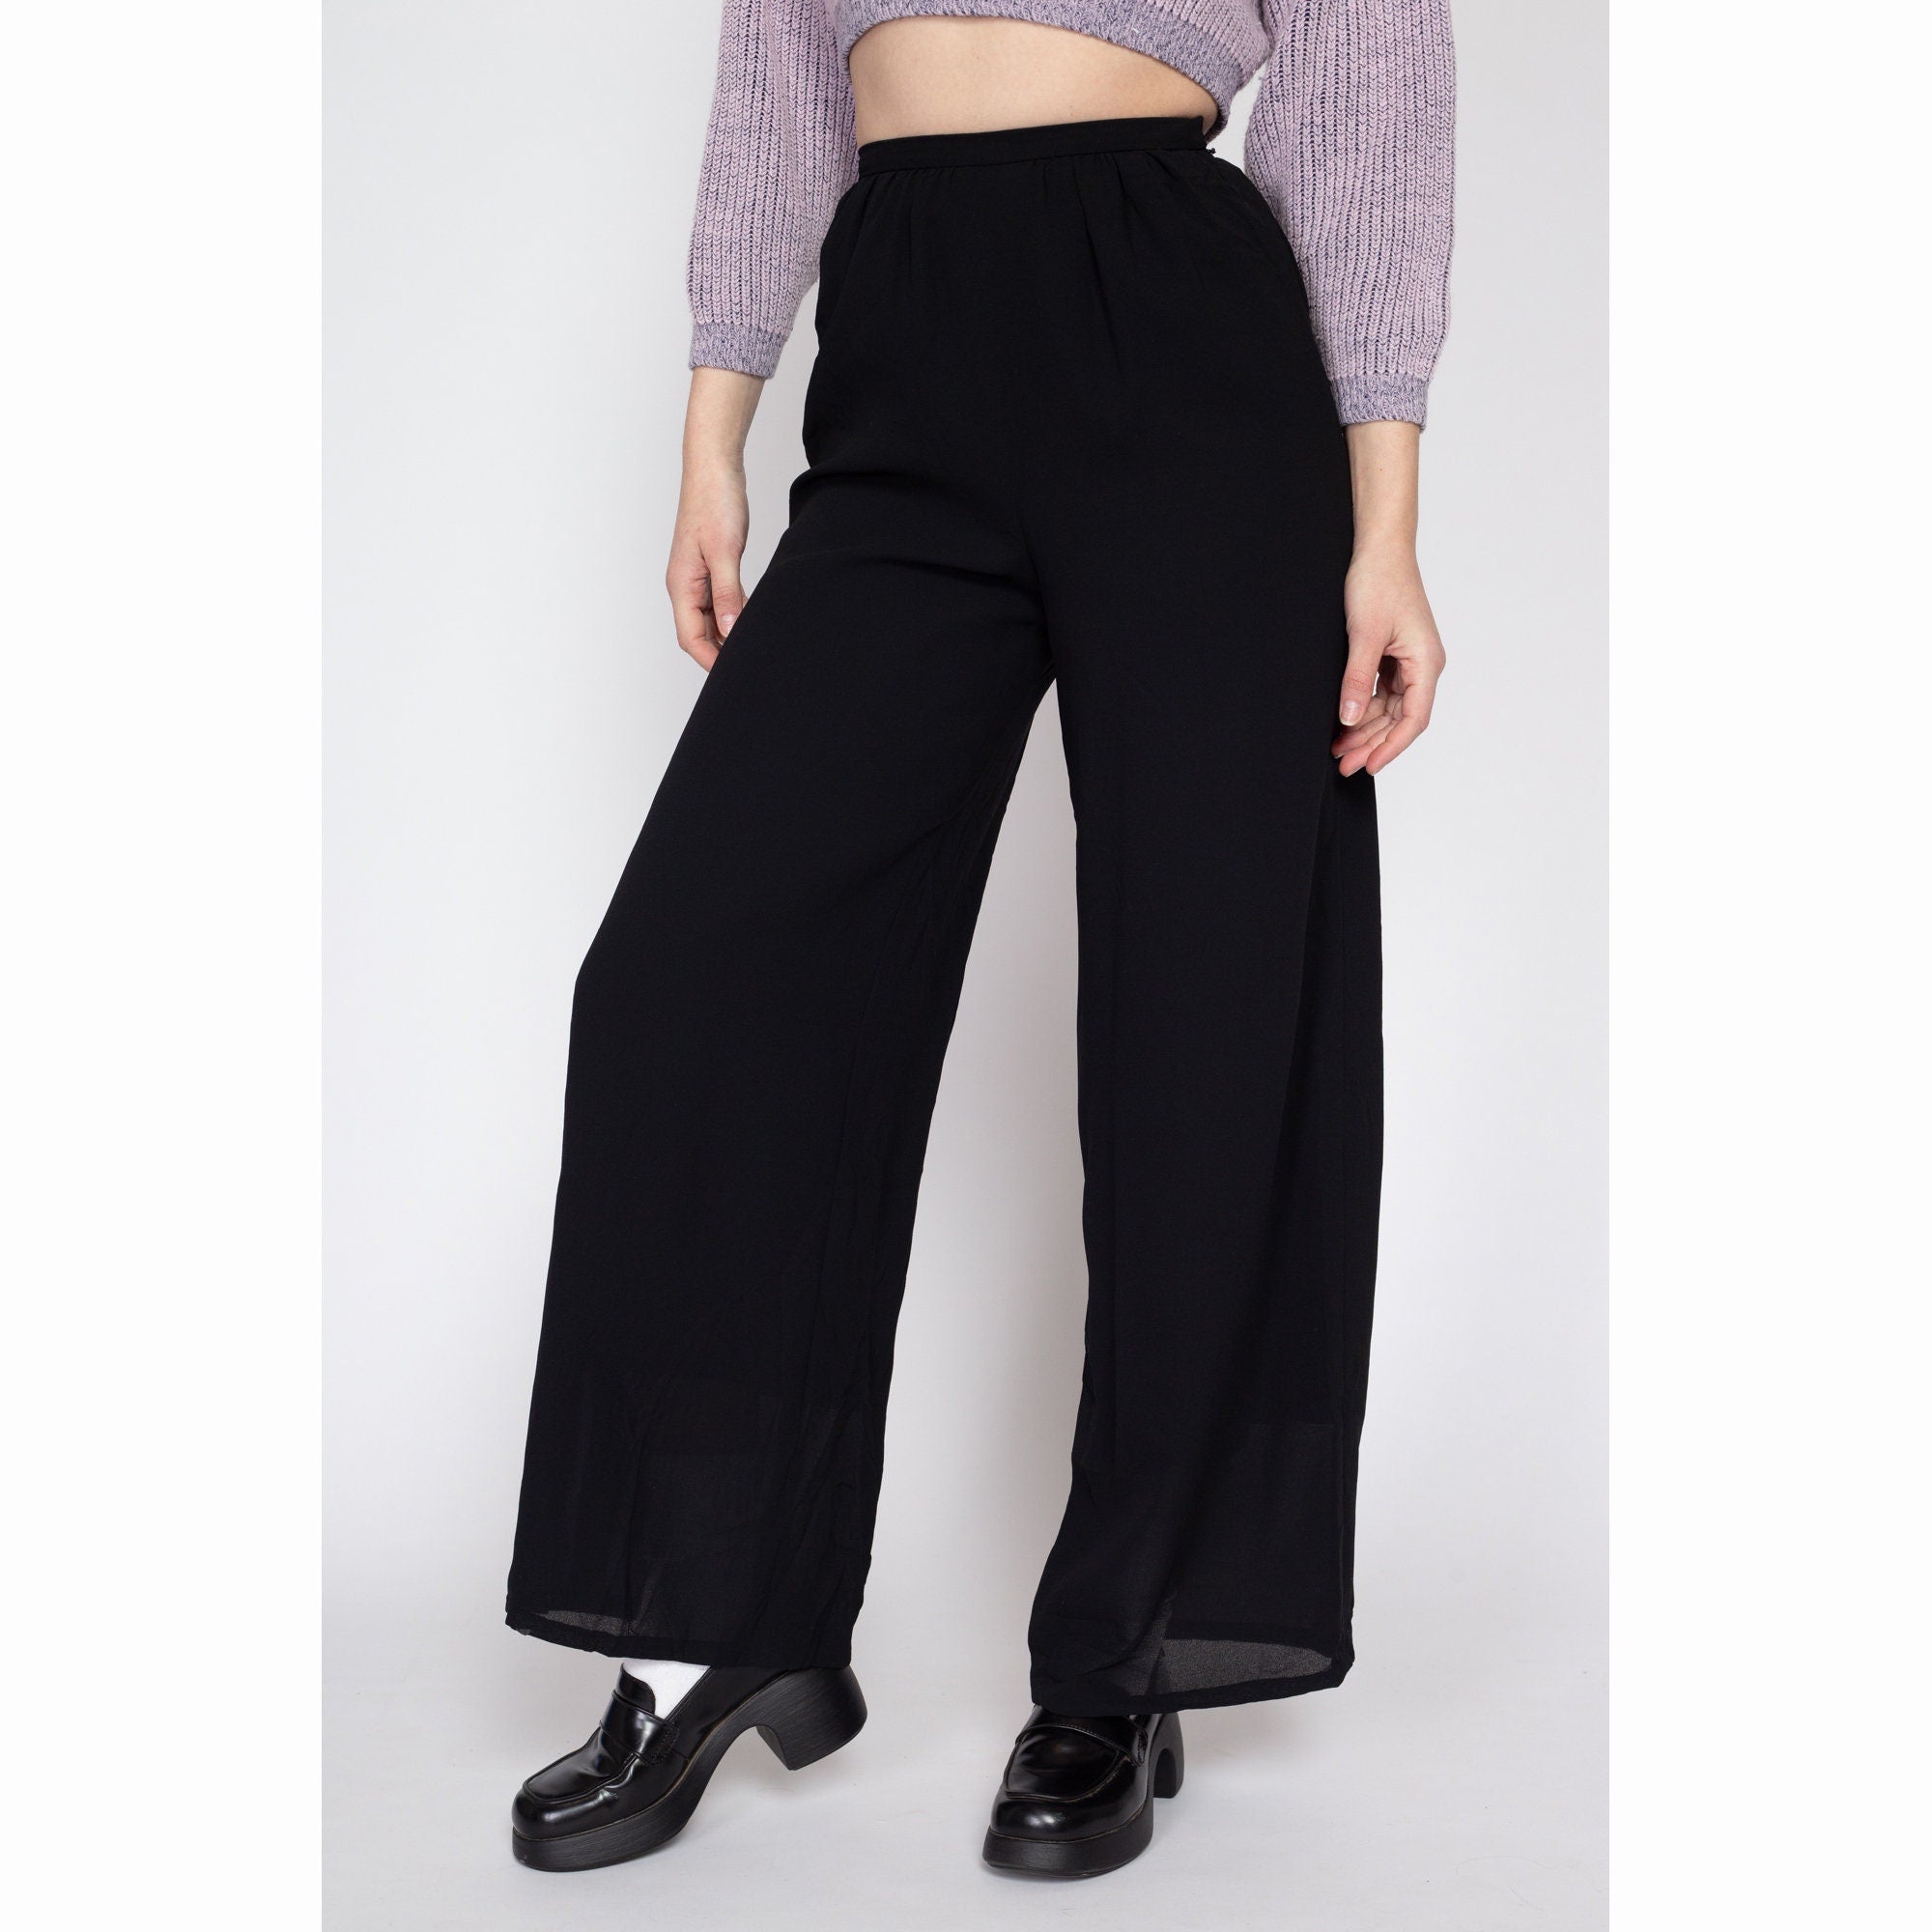 Y2K Cargo Pants For Men And Women Multi Pocket Overalls, Harajuku Style,  Oversized Straight Mopping Baggy Cargo Trousers For Casual And  Spring/Autumn Wear Style 230504 From Kong003, $27.31 | DHgate.Com